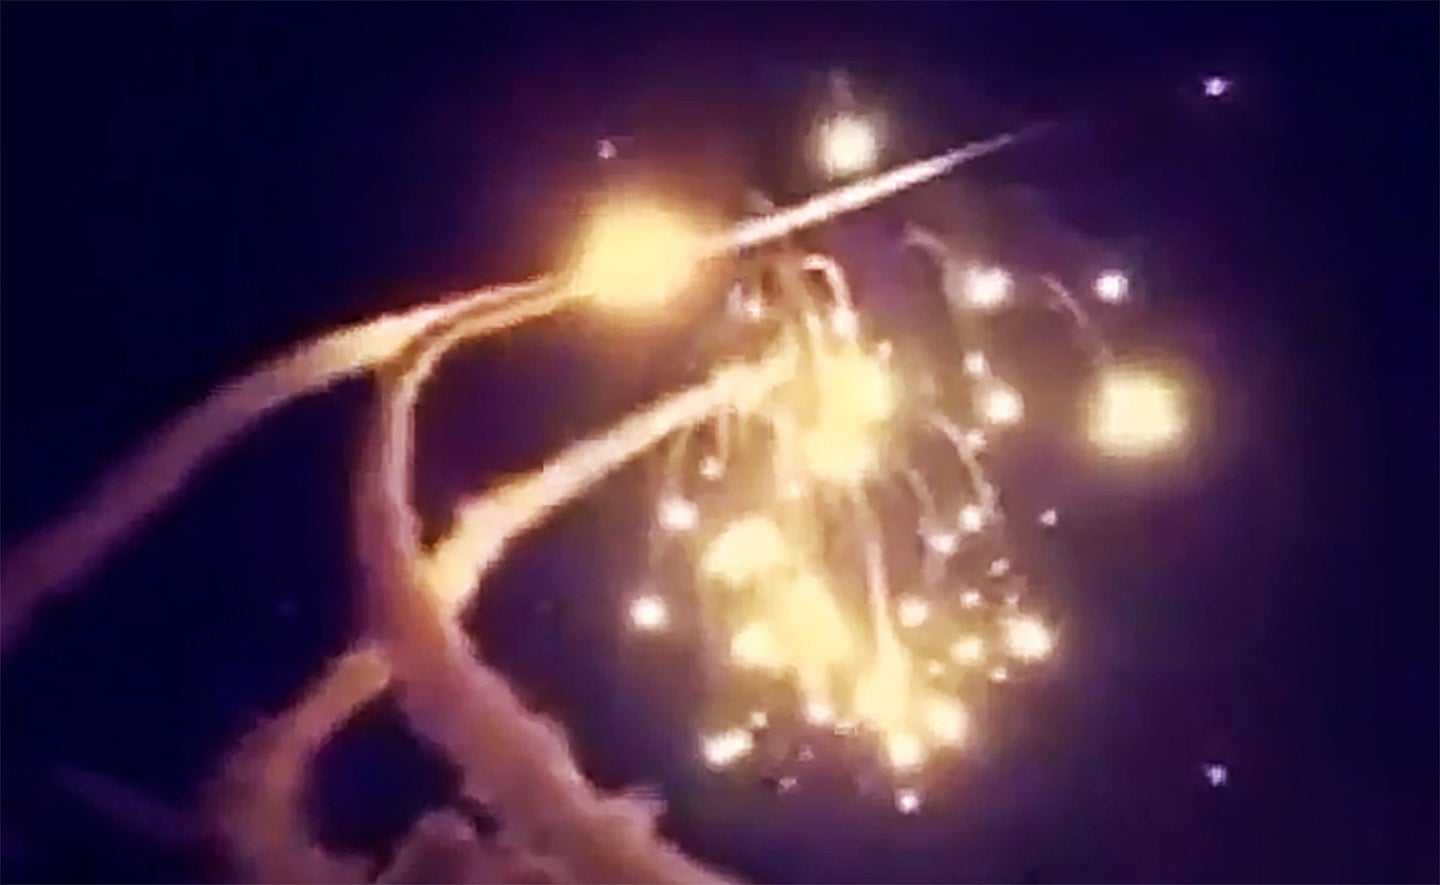 Riyadh Just Came Under Ballistic Missile Attack Resulting In These Crazy Videos